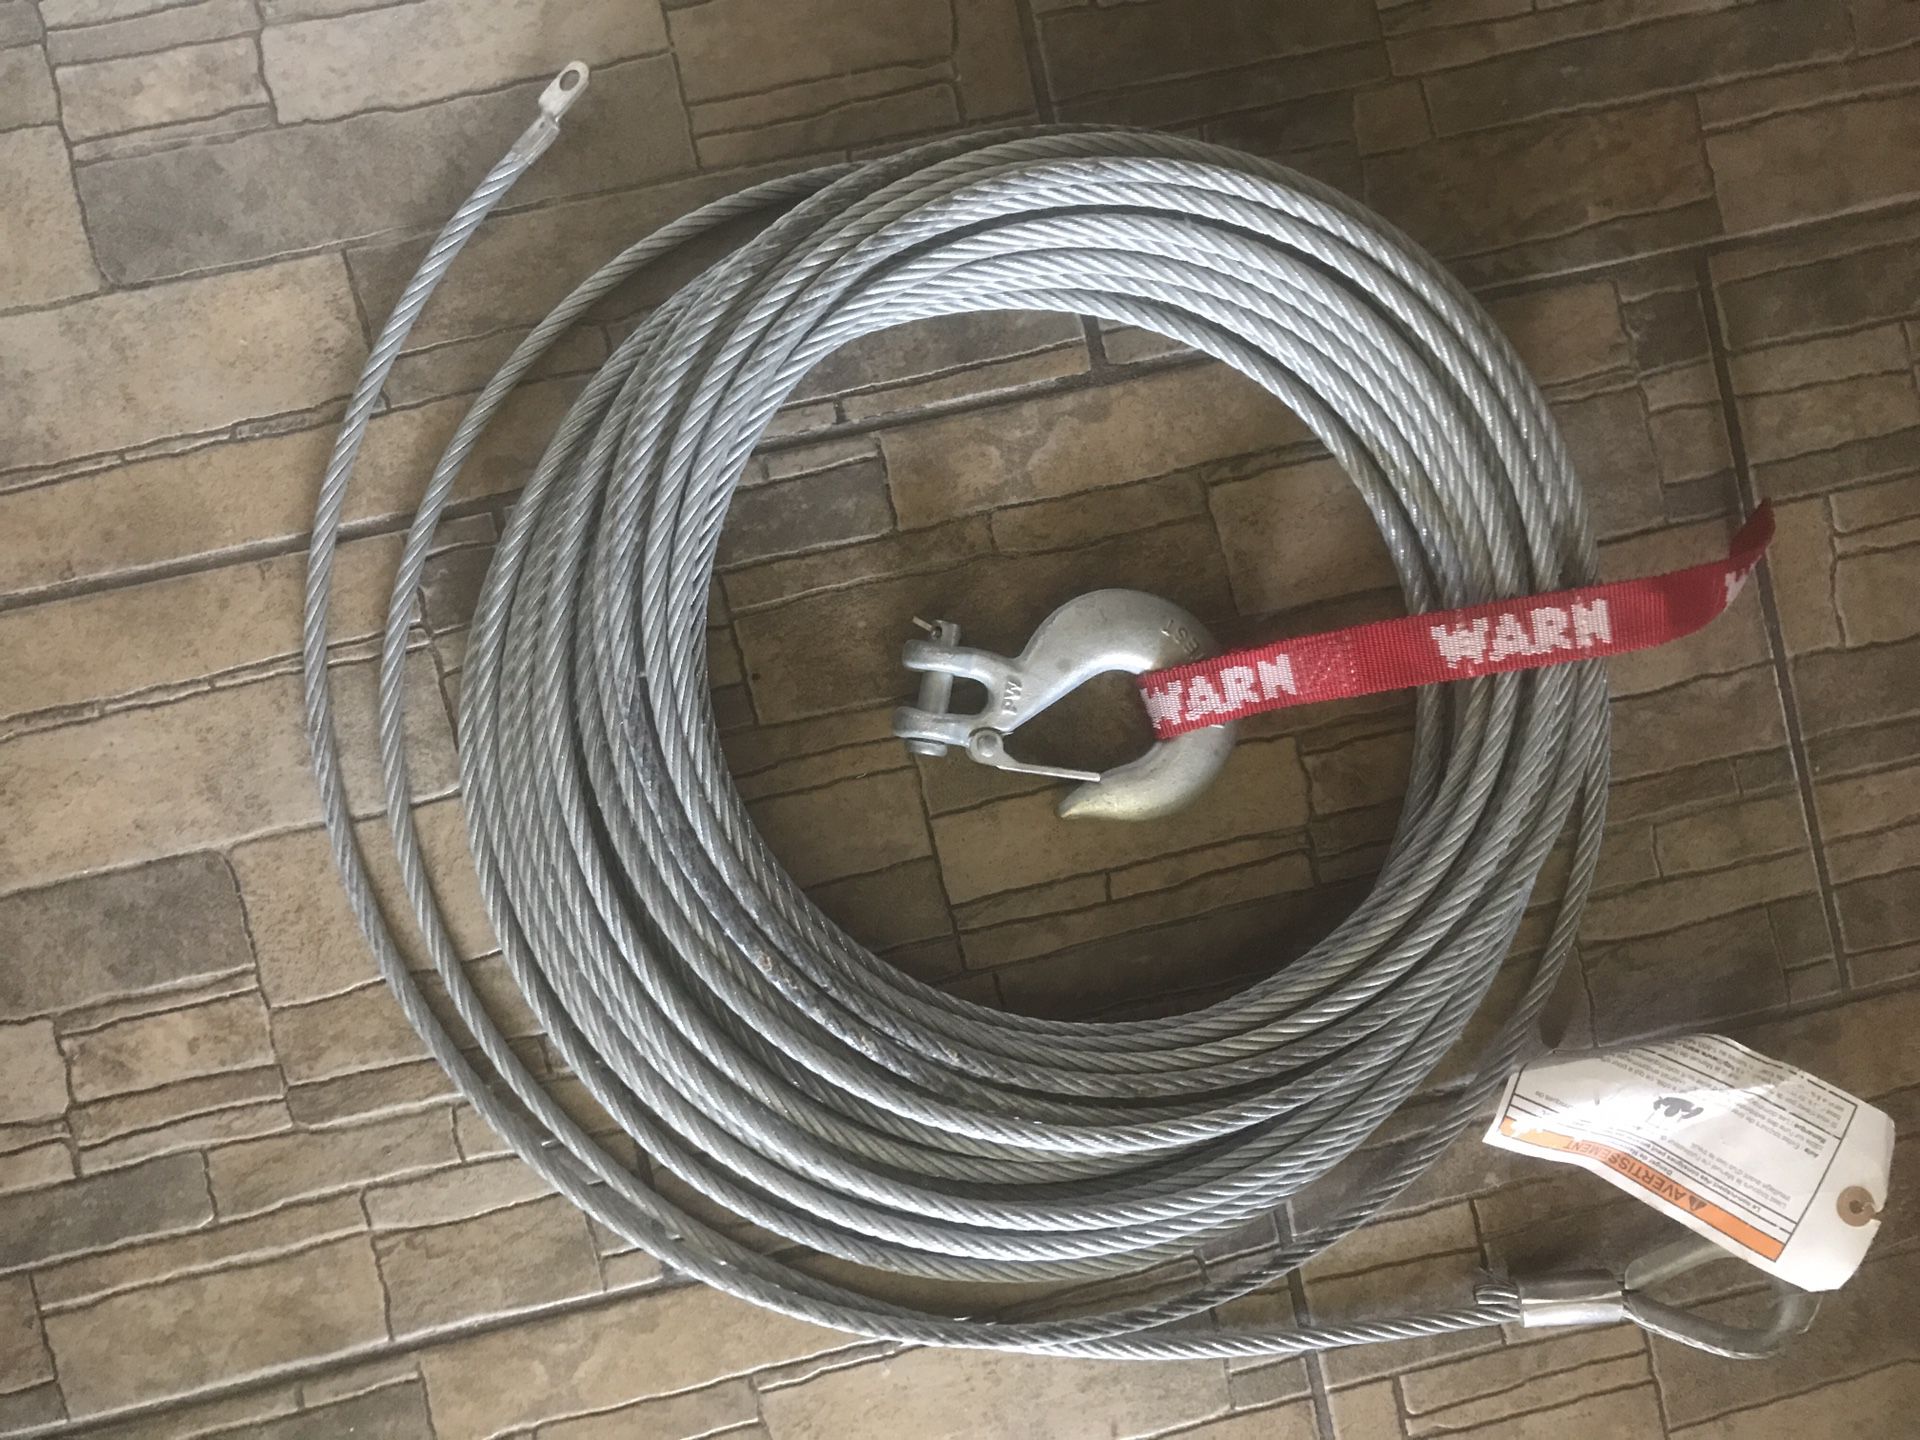 Warn winch steel cable and hook